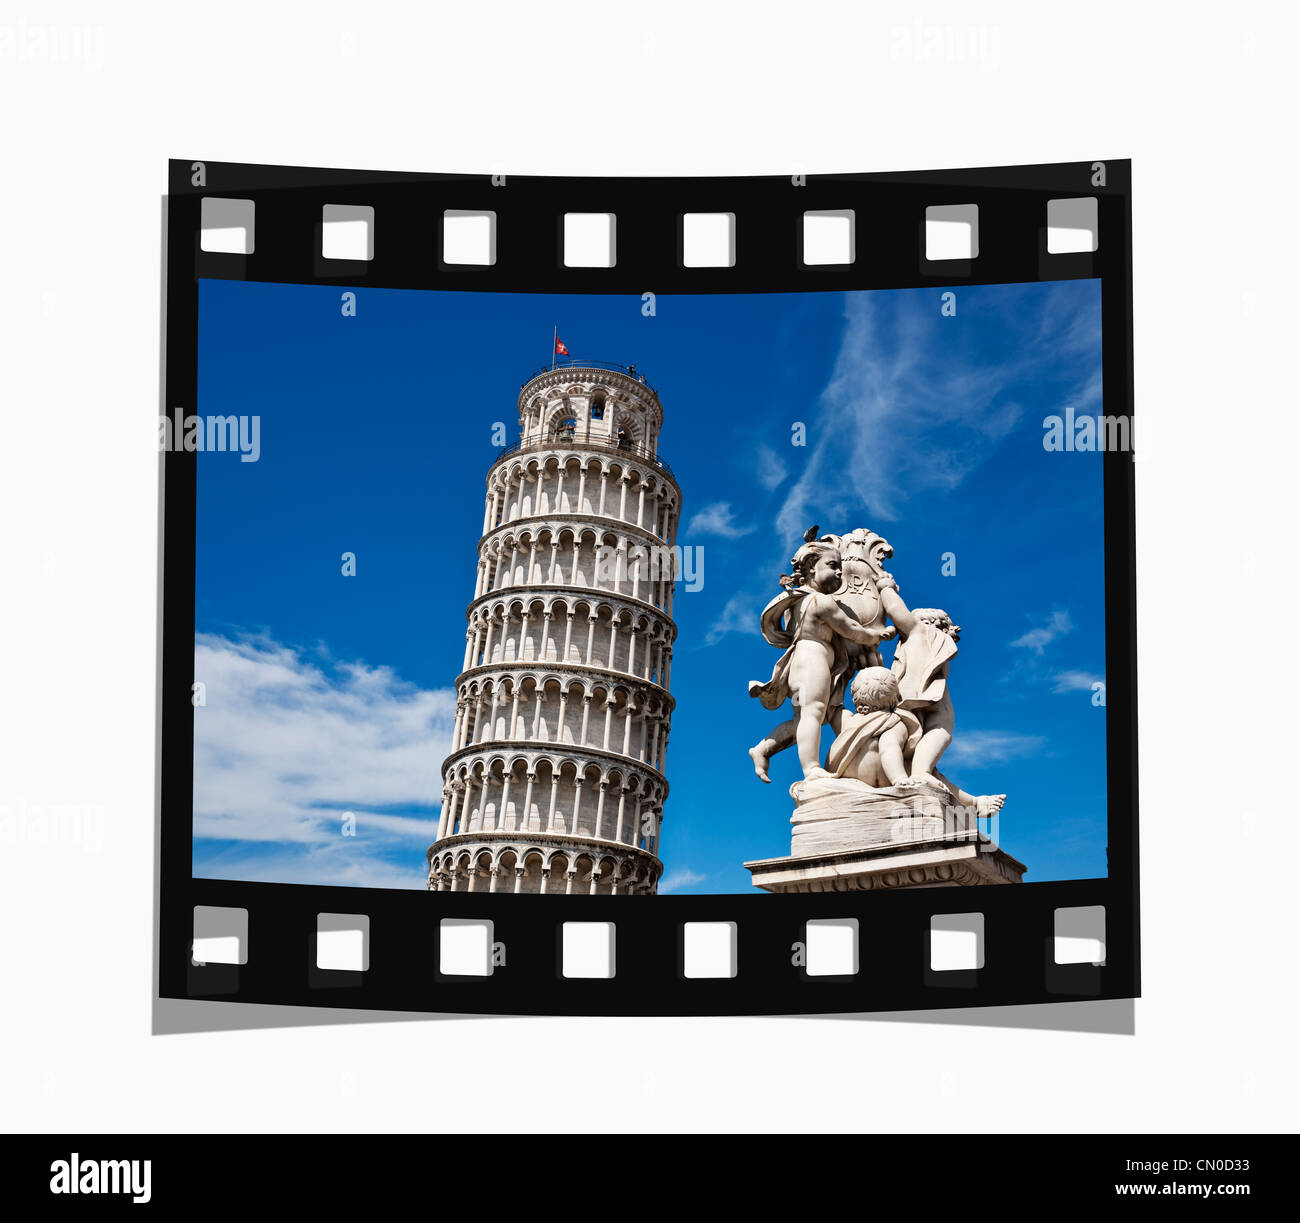 Filmstrip: Leaning Tower of Pisa, 57 meters high, at Cathedral Square, Pisa, Tuscany, Italy, Europe Stock Photo